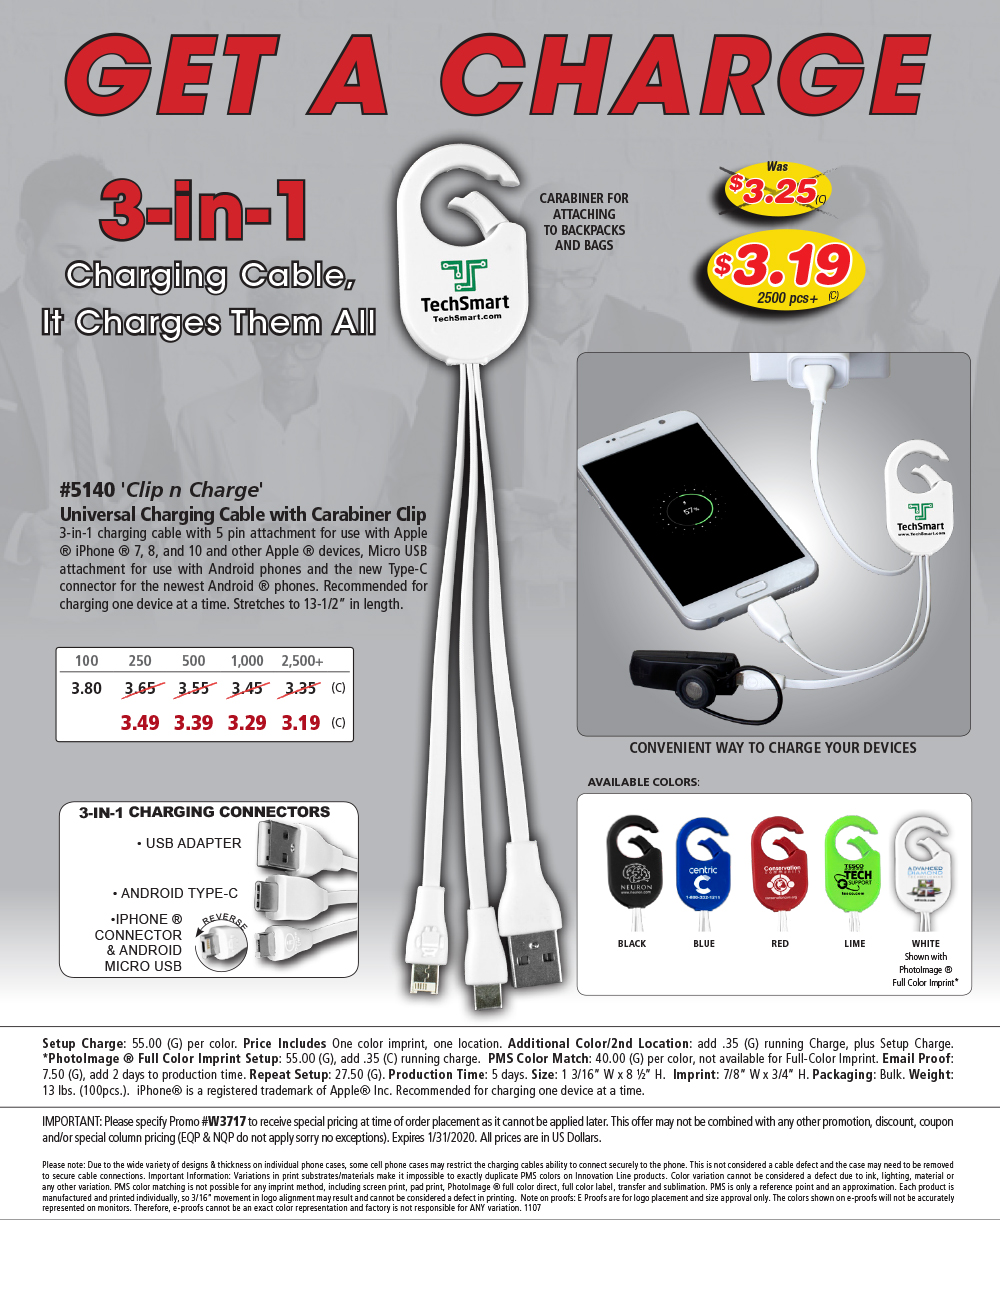 #5140 Weber 3-in-1 Charging Cable For Cell Phones and Tablets wiht Carabiner Type Spring Clip